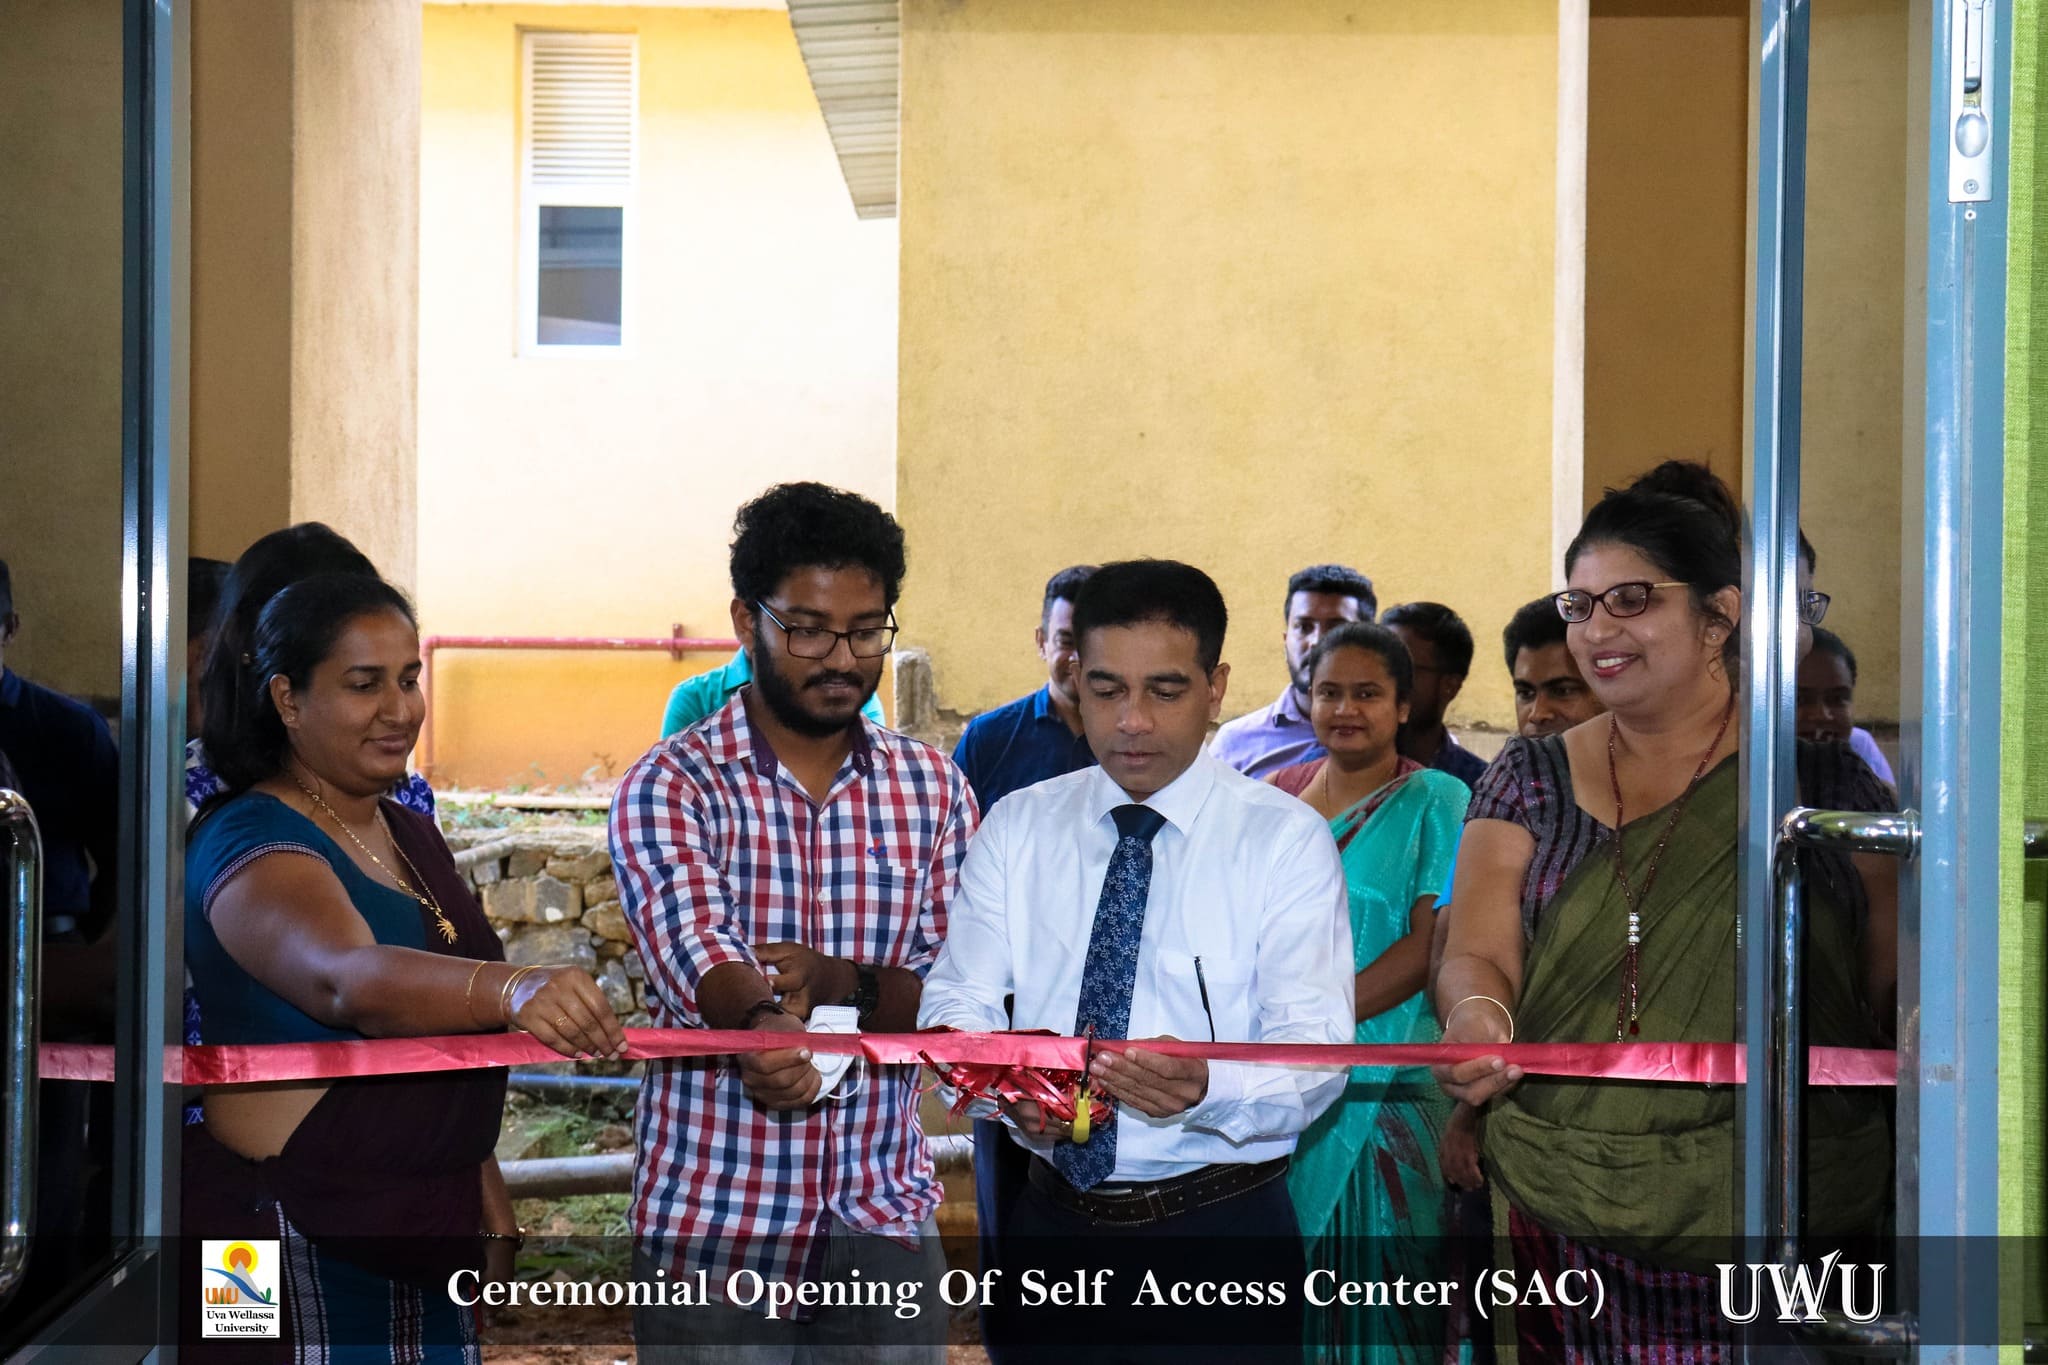 Opening of Self-Access Center (SAC), Faculty of Applied Sciences